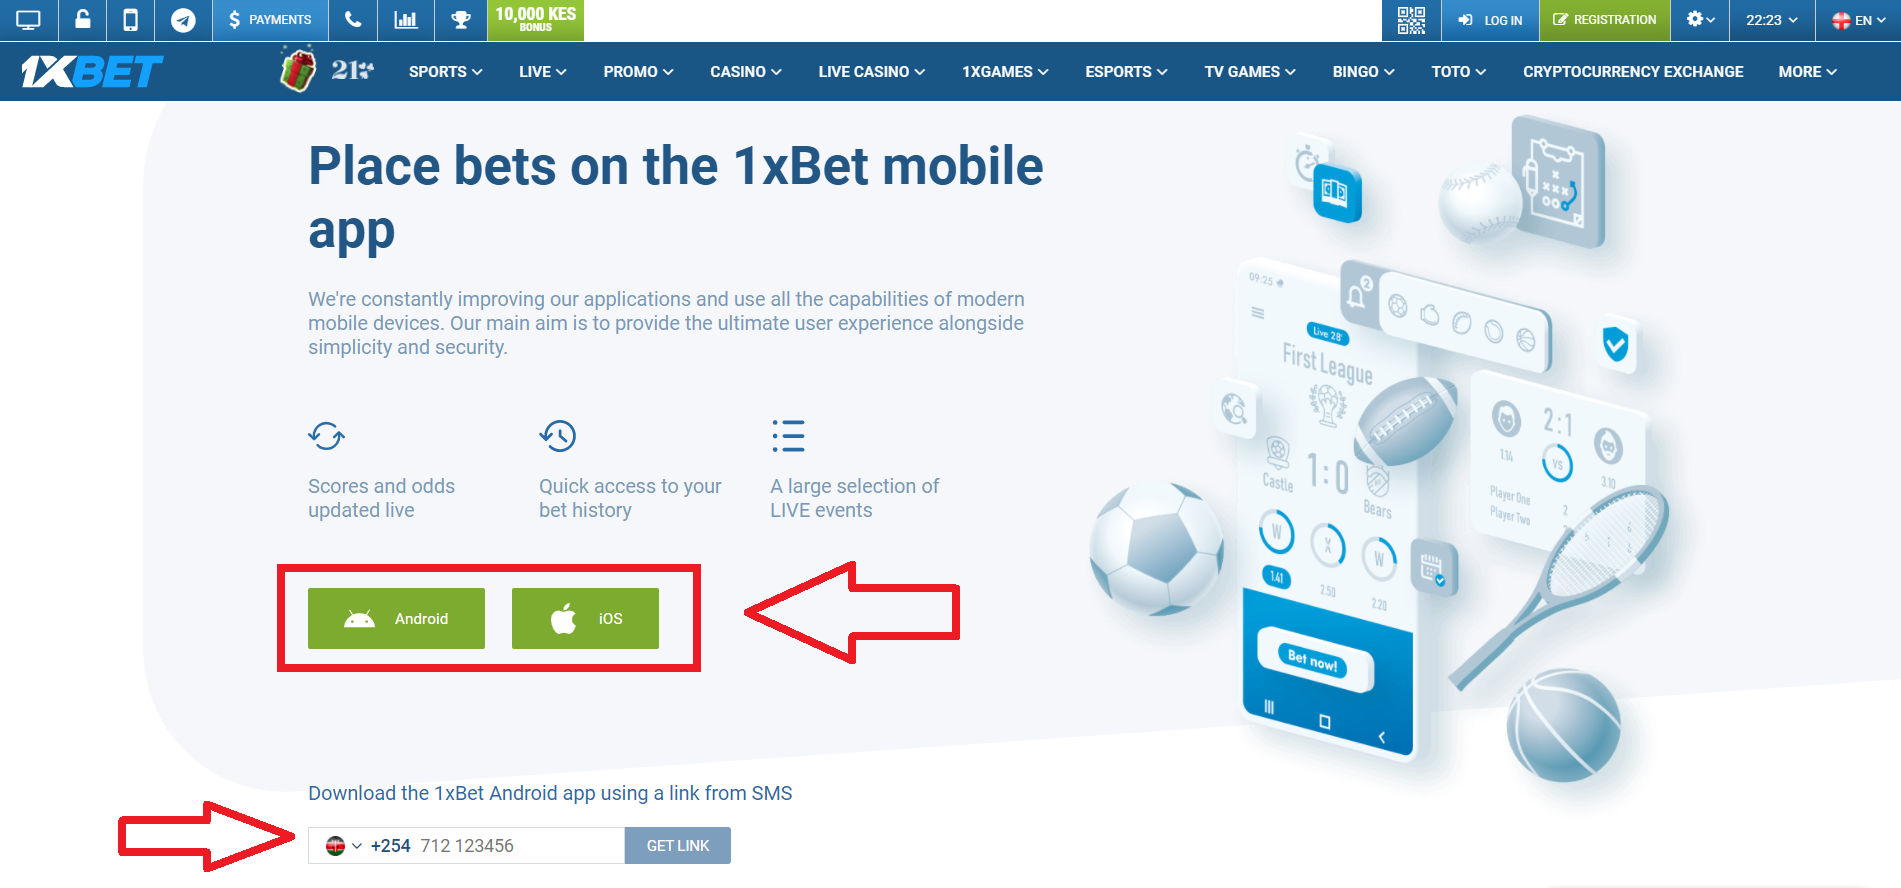 1xBet app — how to correctly download in Kenya